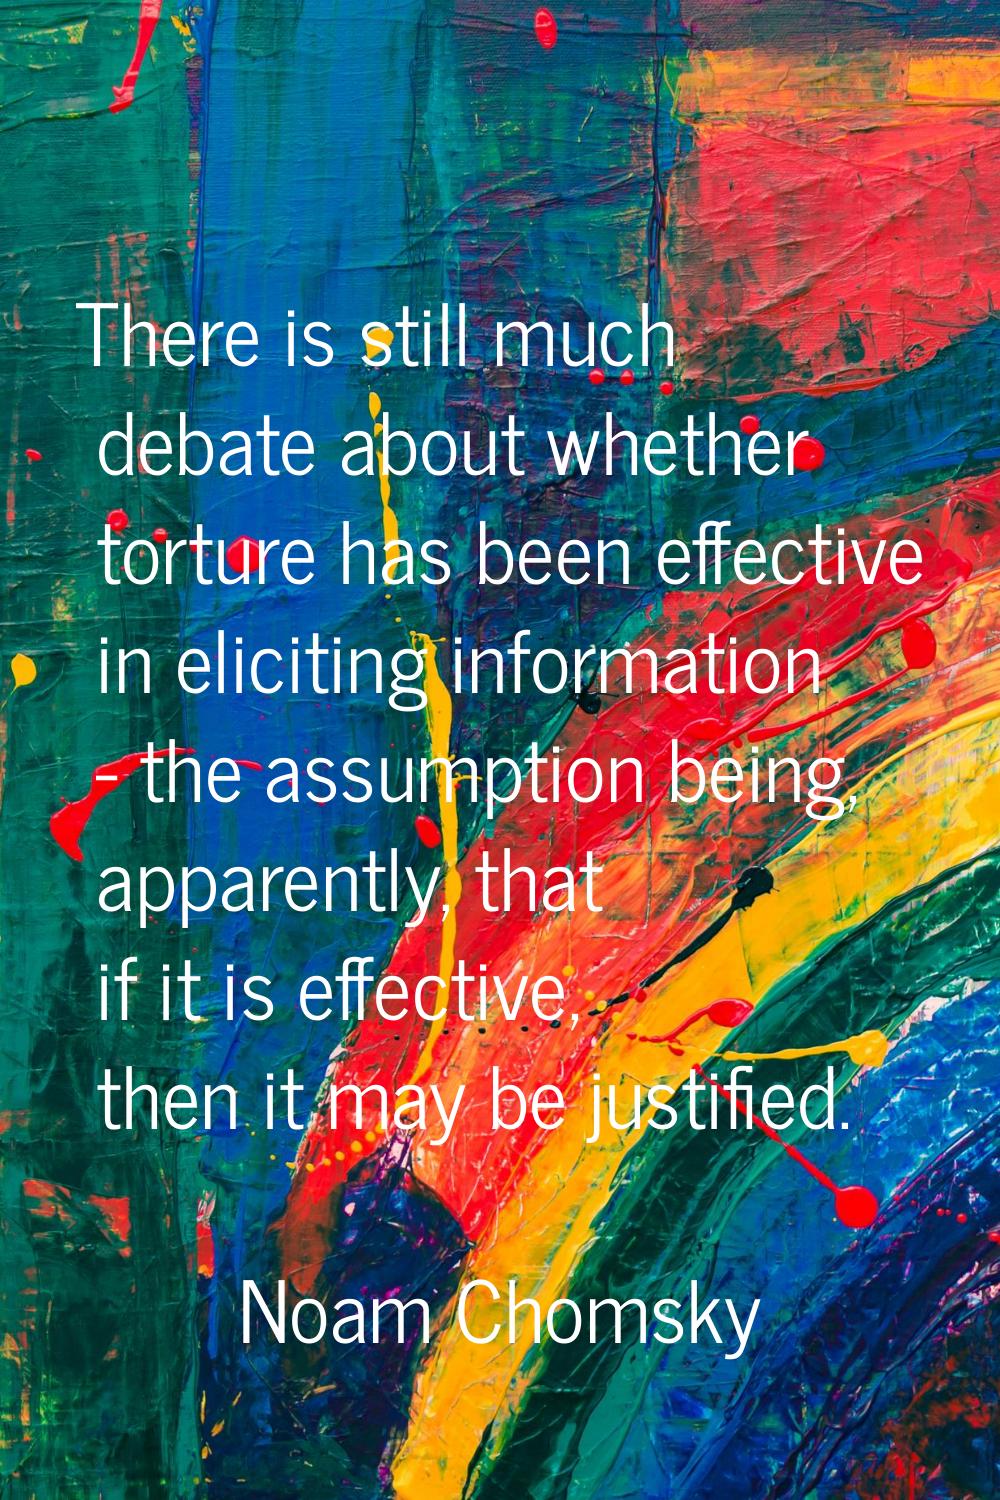 There is still much debate about whether torture has been effective in eliciting information - the 